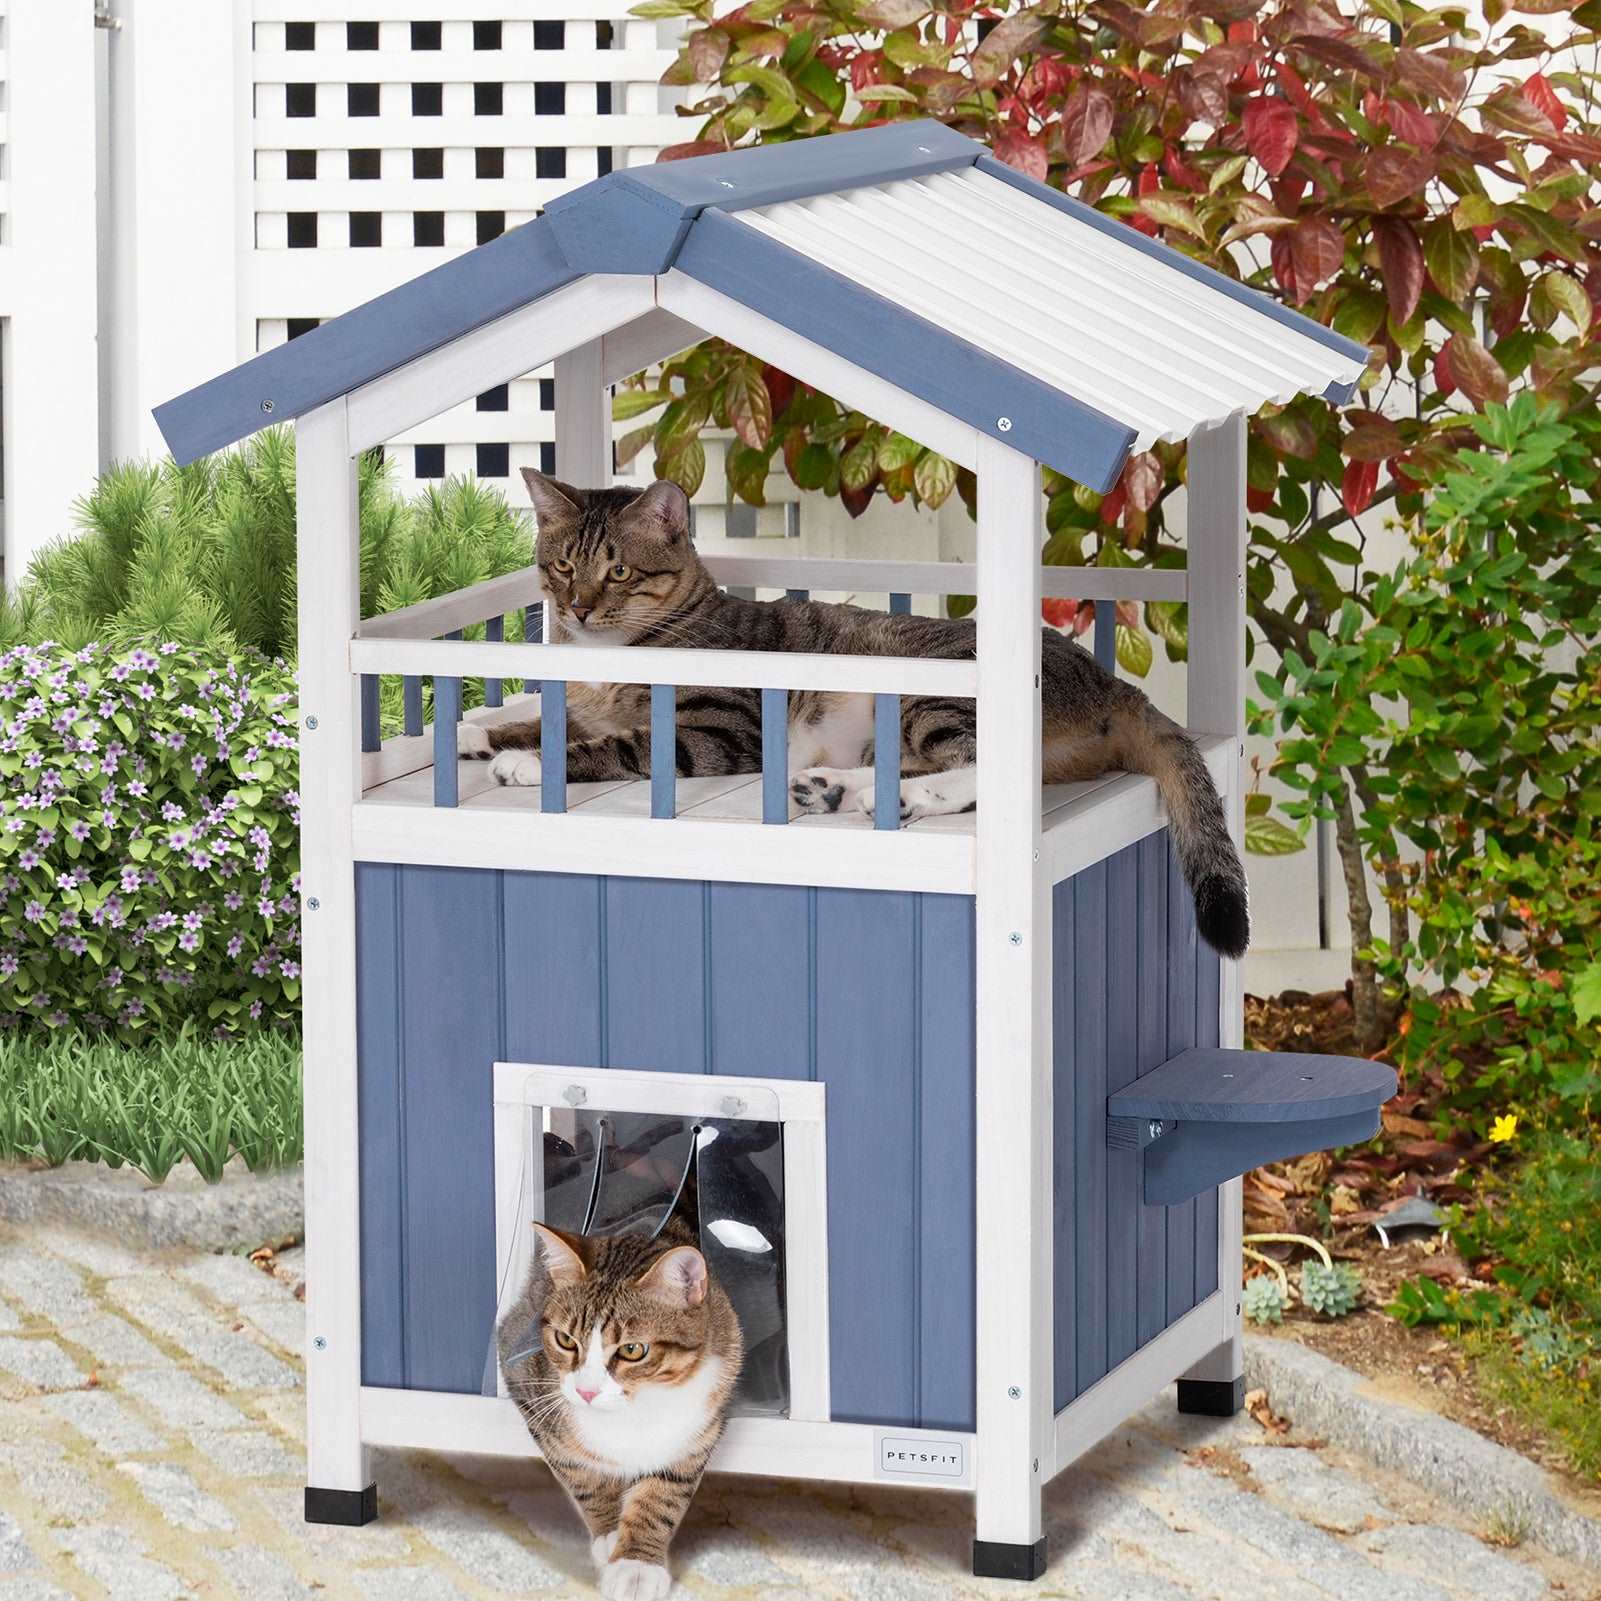 https://petsfit.com/products/petsfit-outside-wooden-cat-house-pvc-roof-door-with-curtain-escape-door-01